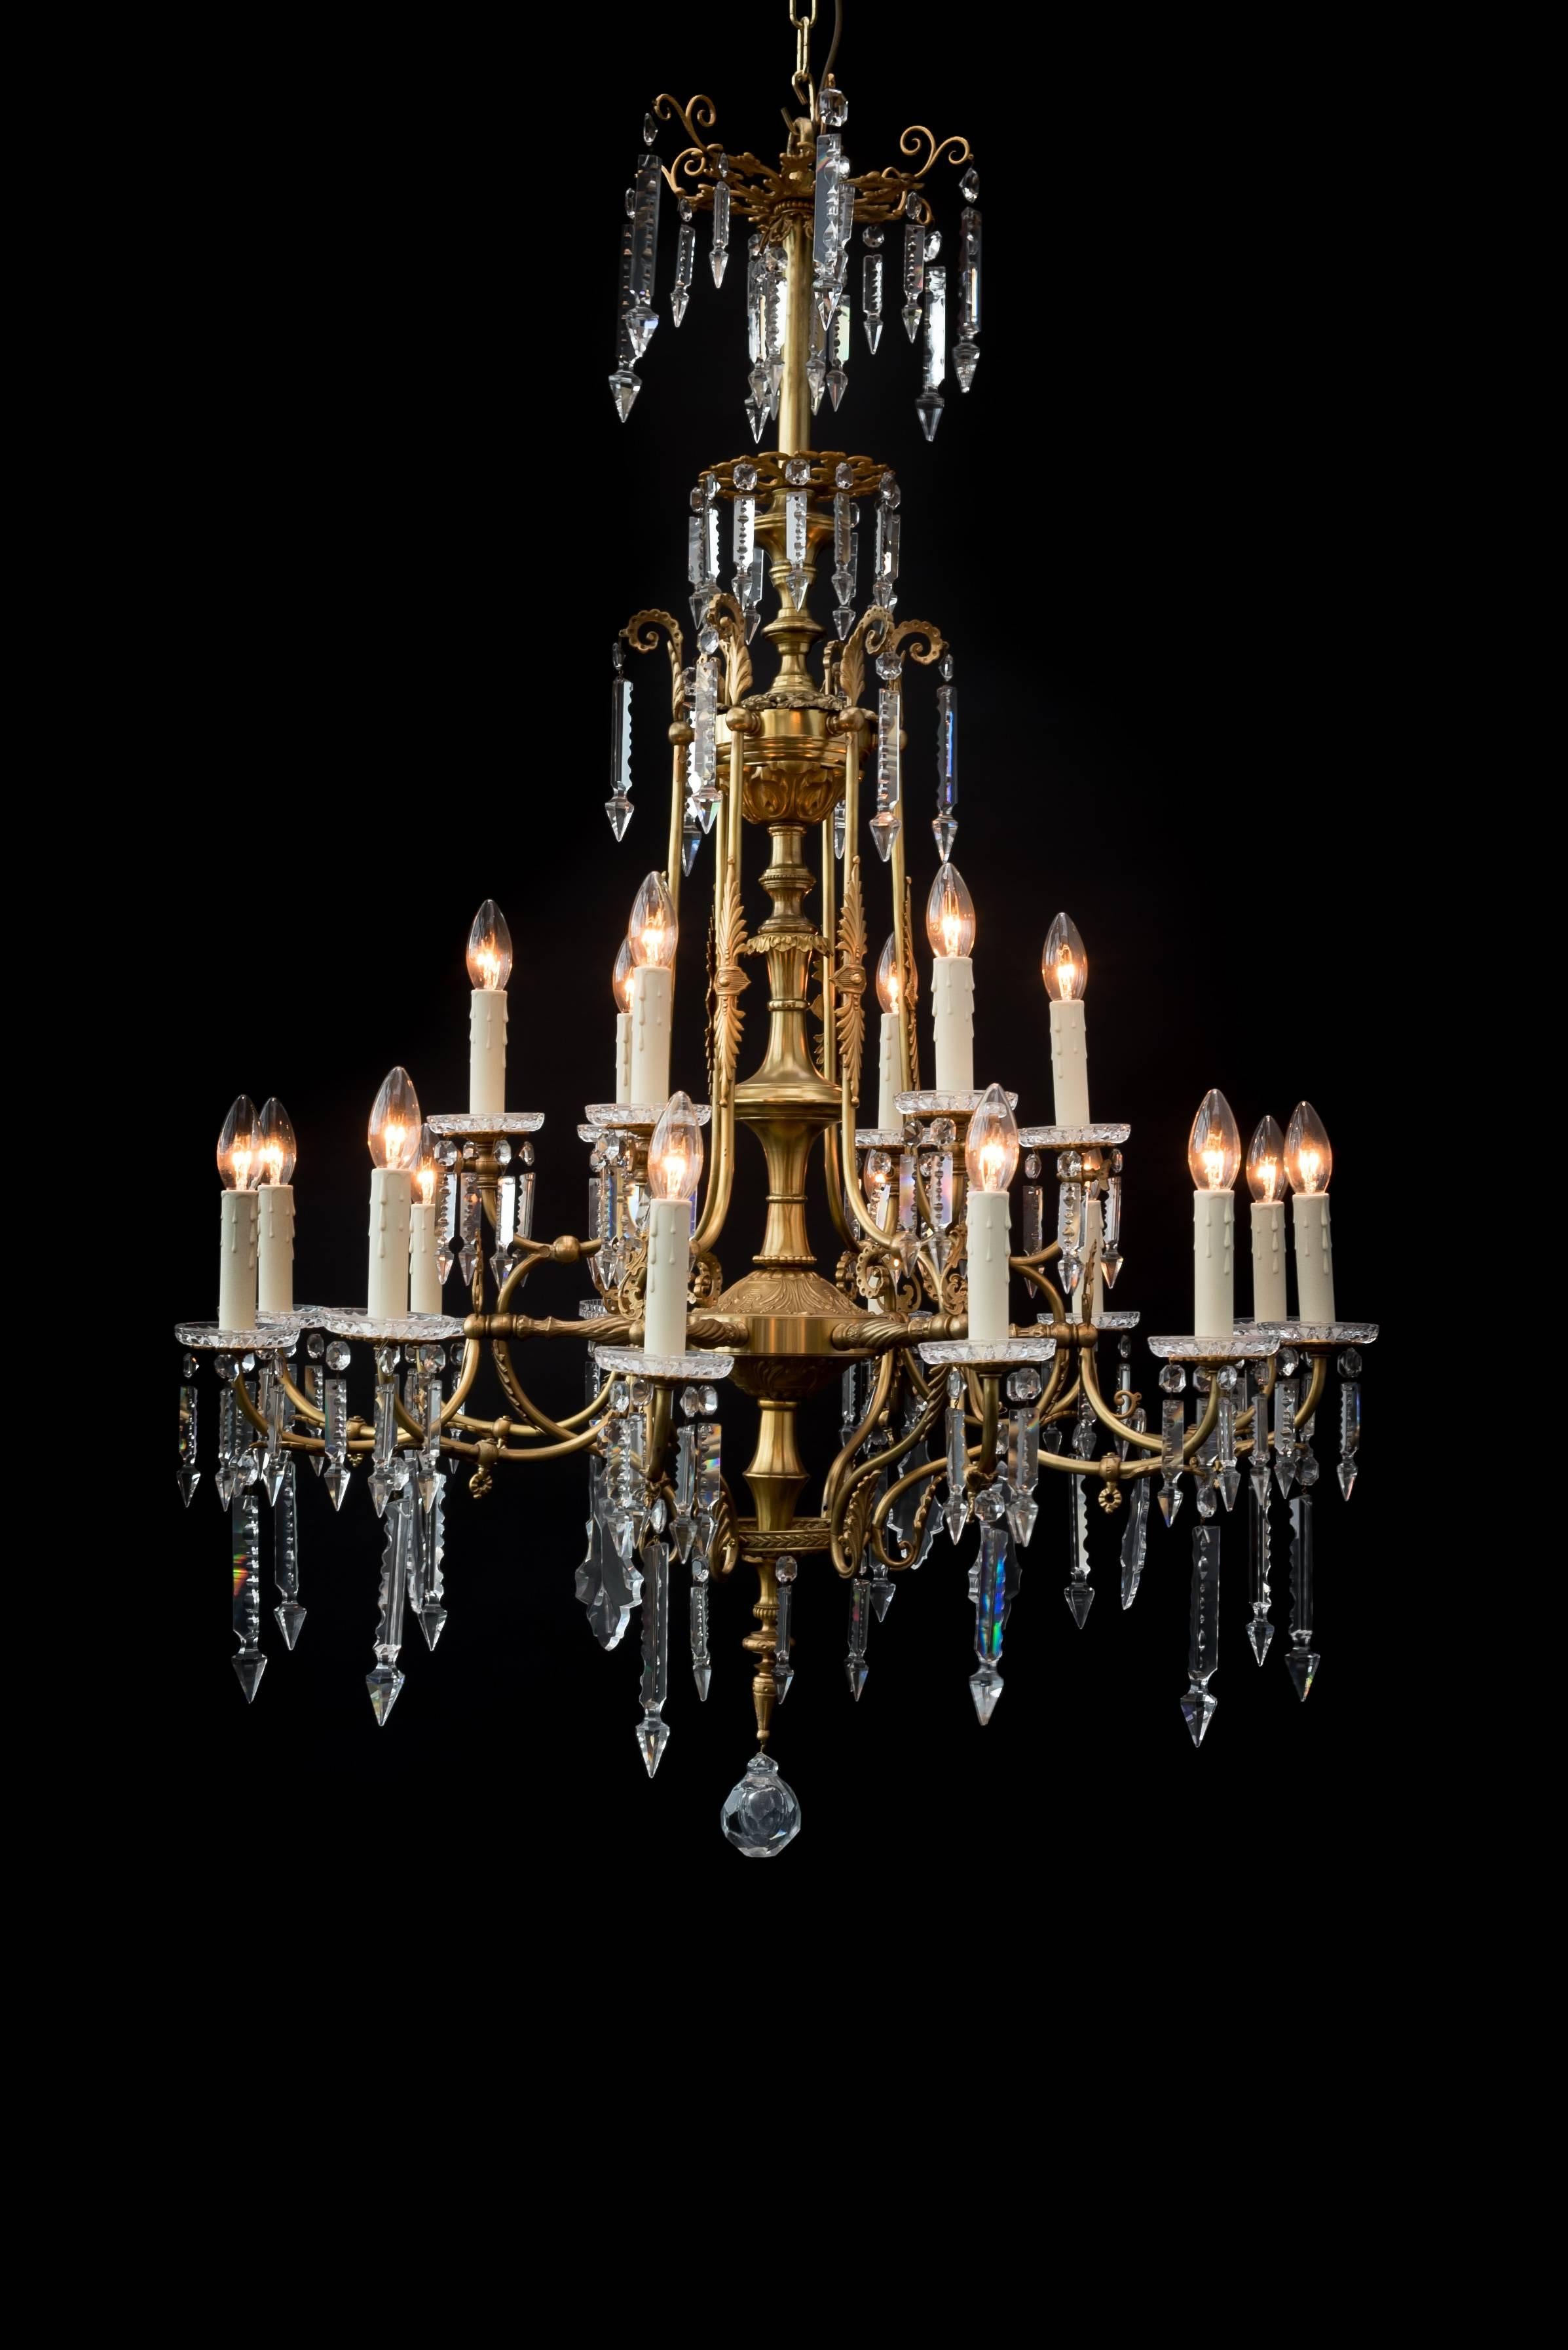 Eighteen-light French chandelier in neoclassical style.
Made from bronze and originally intended for gaslight later converted to electricity. 
Cast in Paris circa 1860 with beautiful original hand-cut crystals.
Unique chandelier.